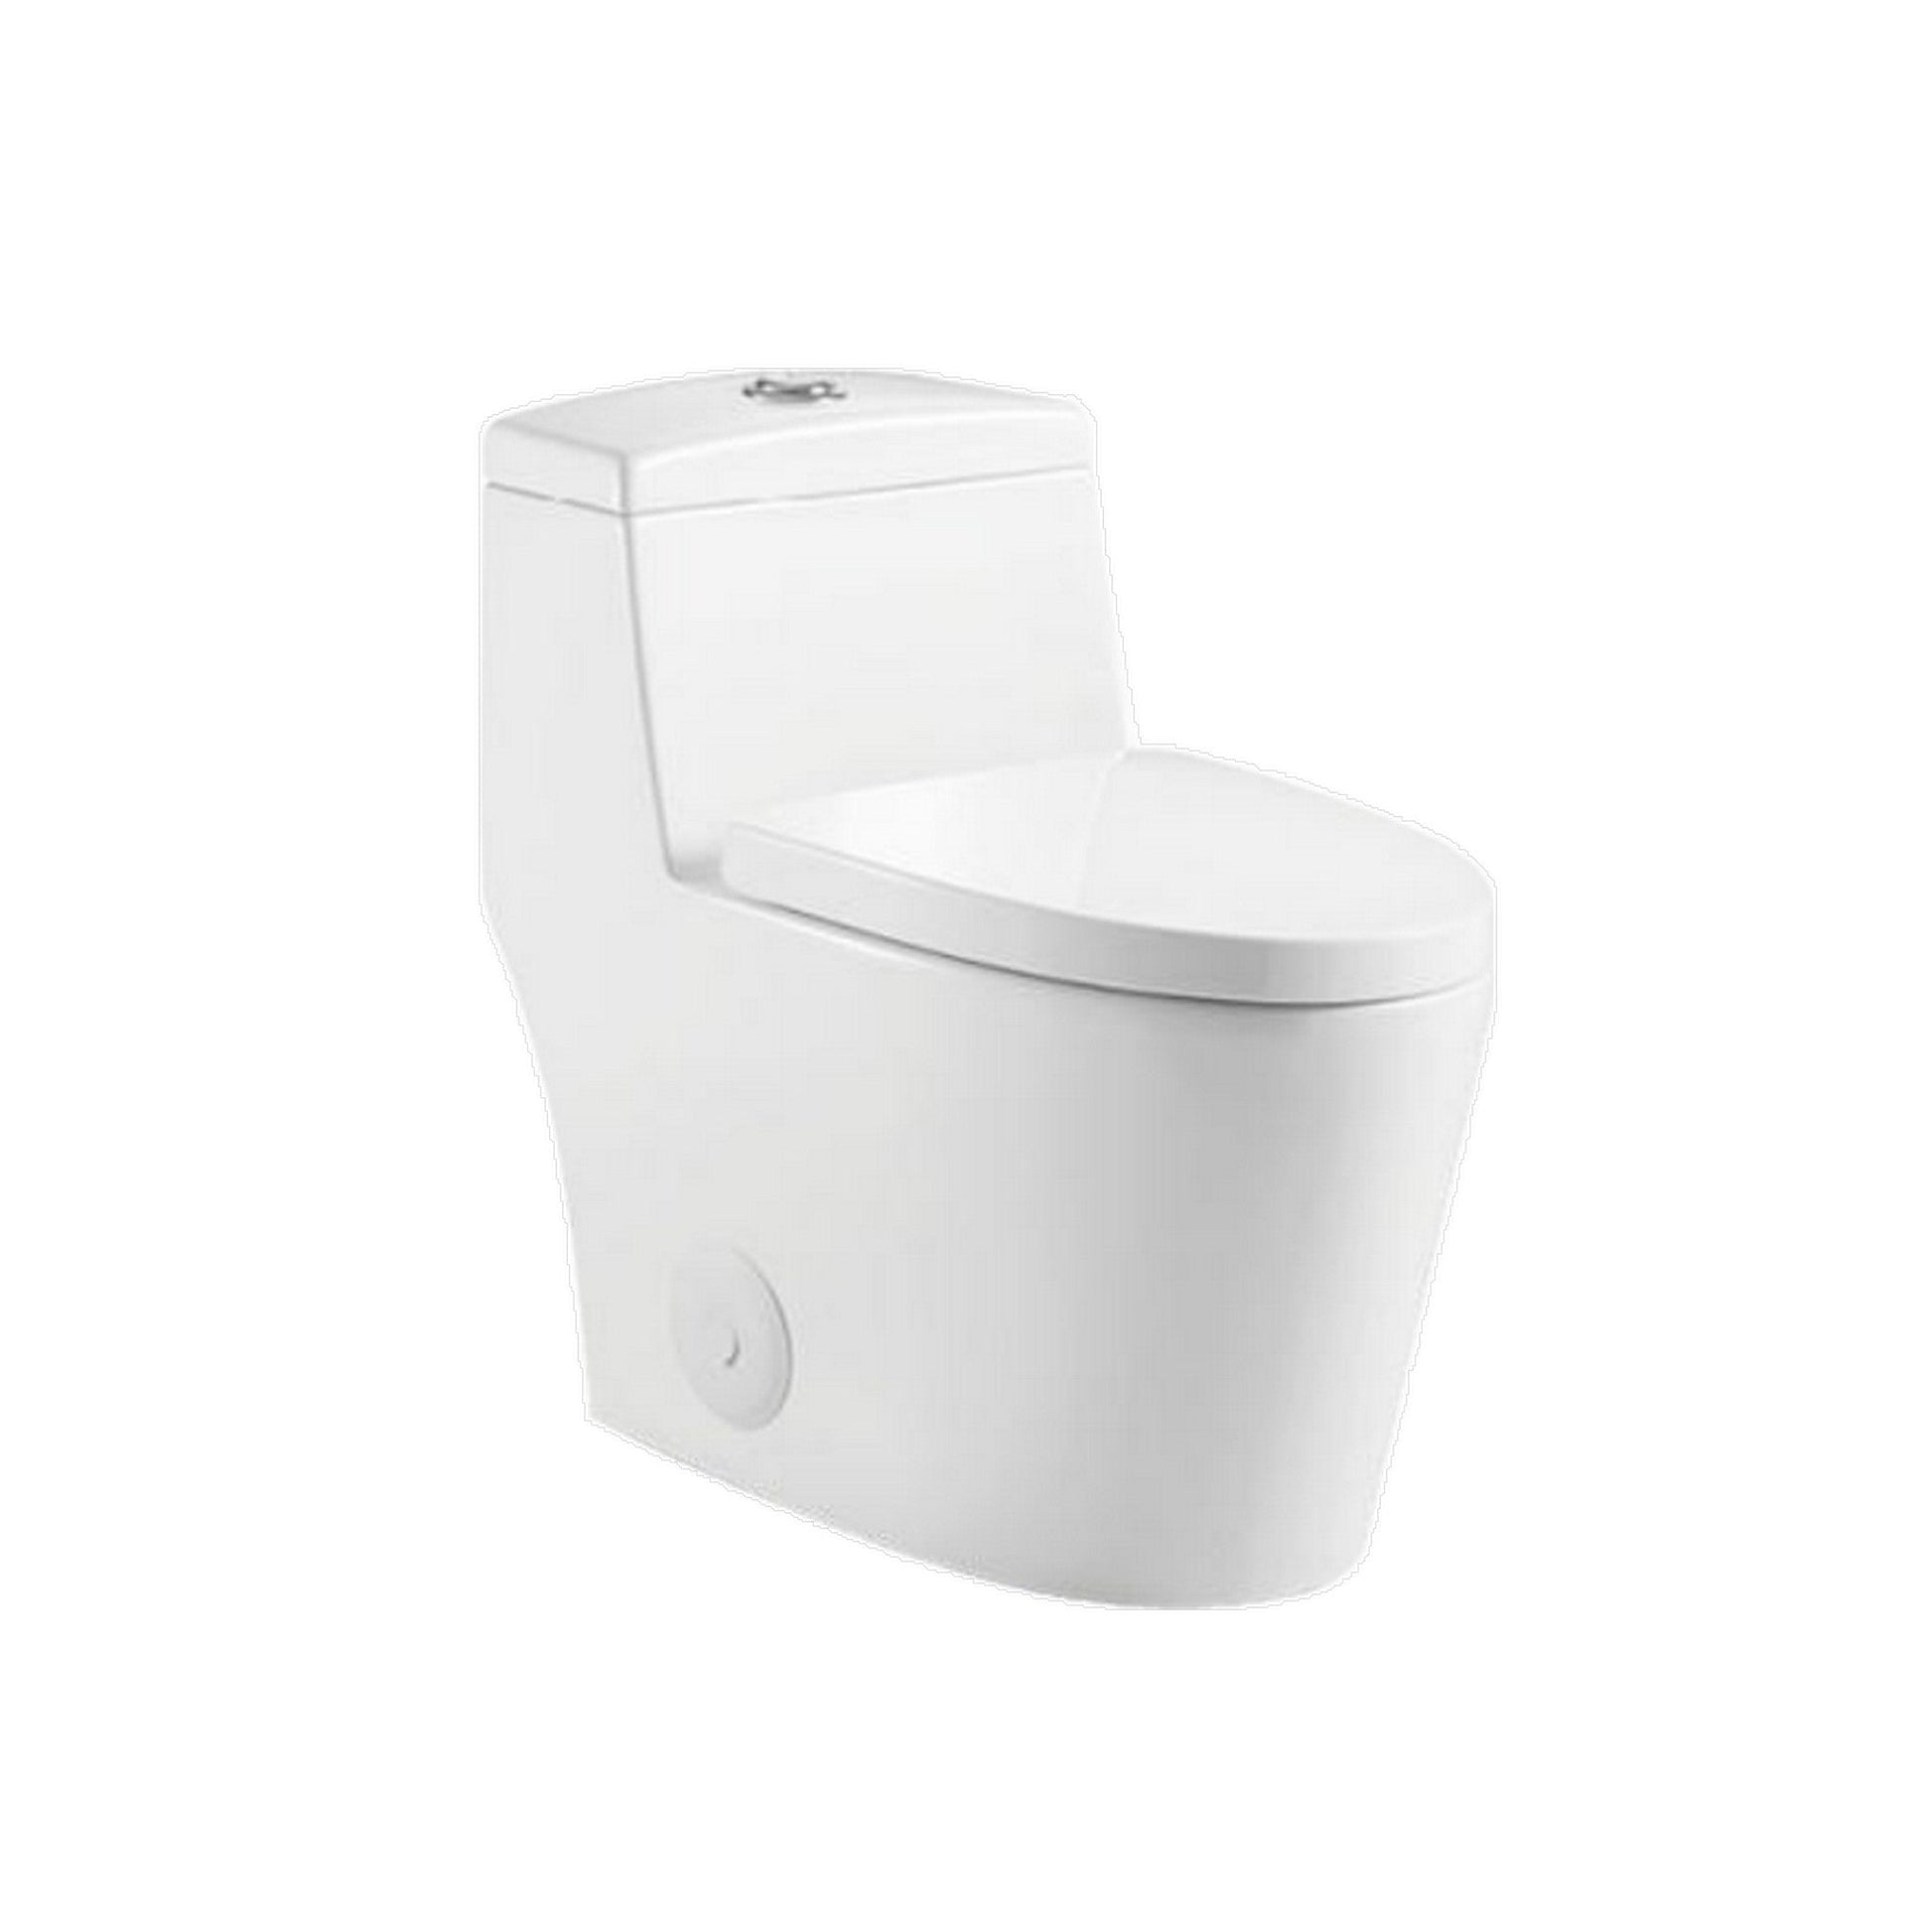 Ratel 16" x 27" White Gloss One-Piece Dual-Flush Floor-Mounted Toilet With Soft-Close Seat